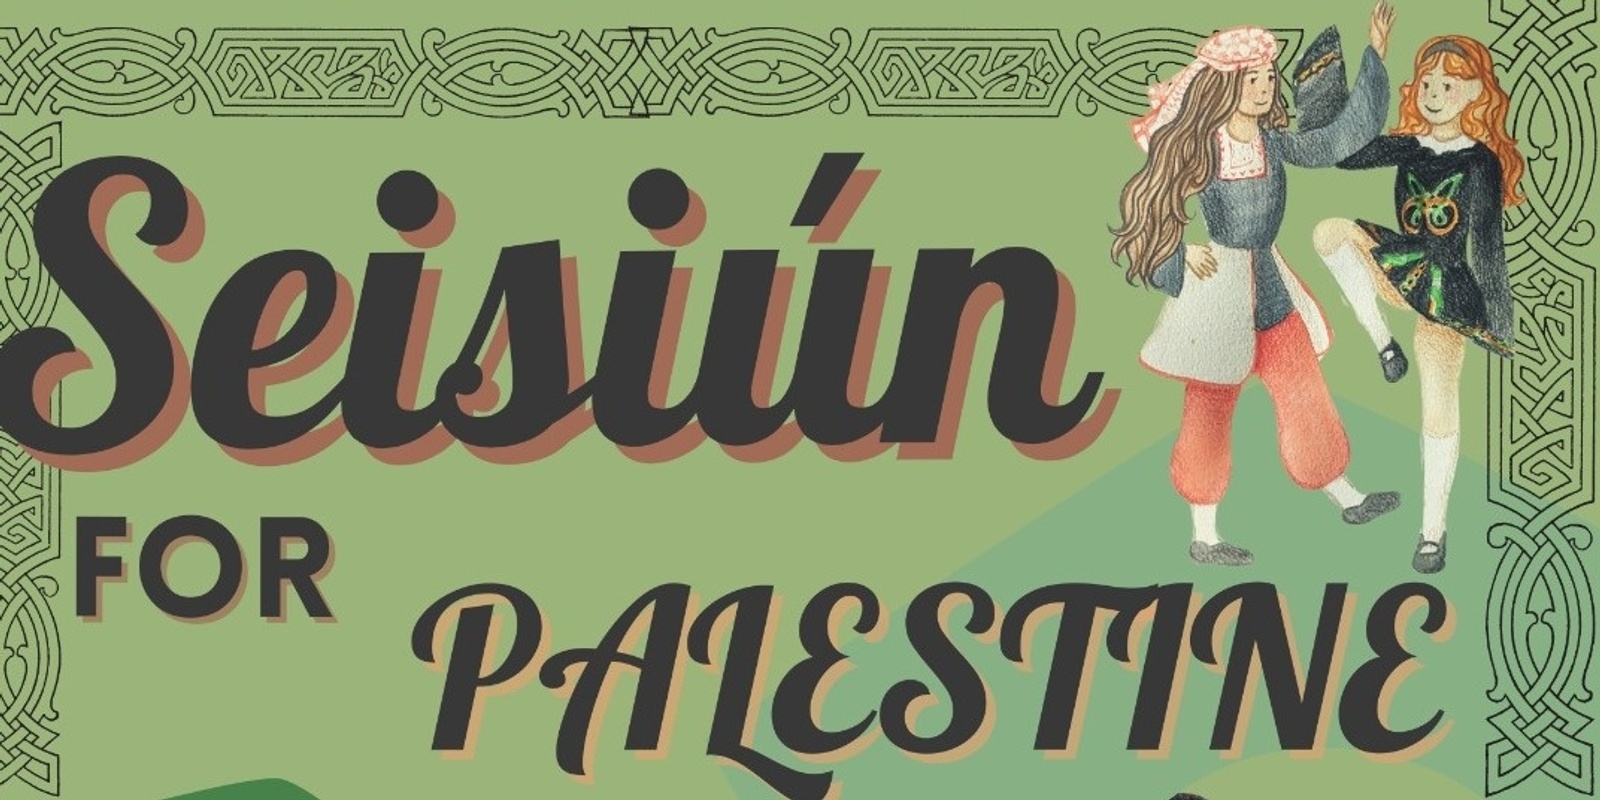 Banner image for Seisiún for Palestine 